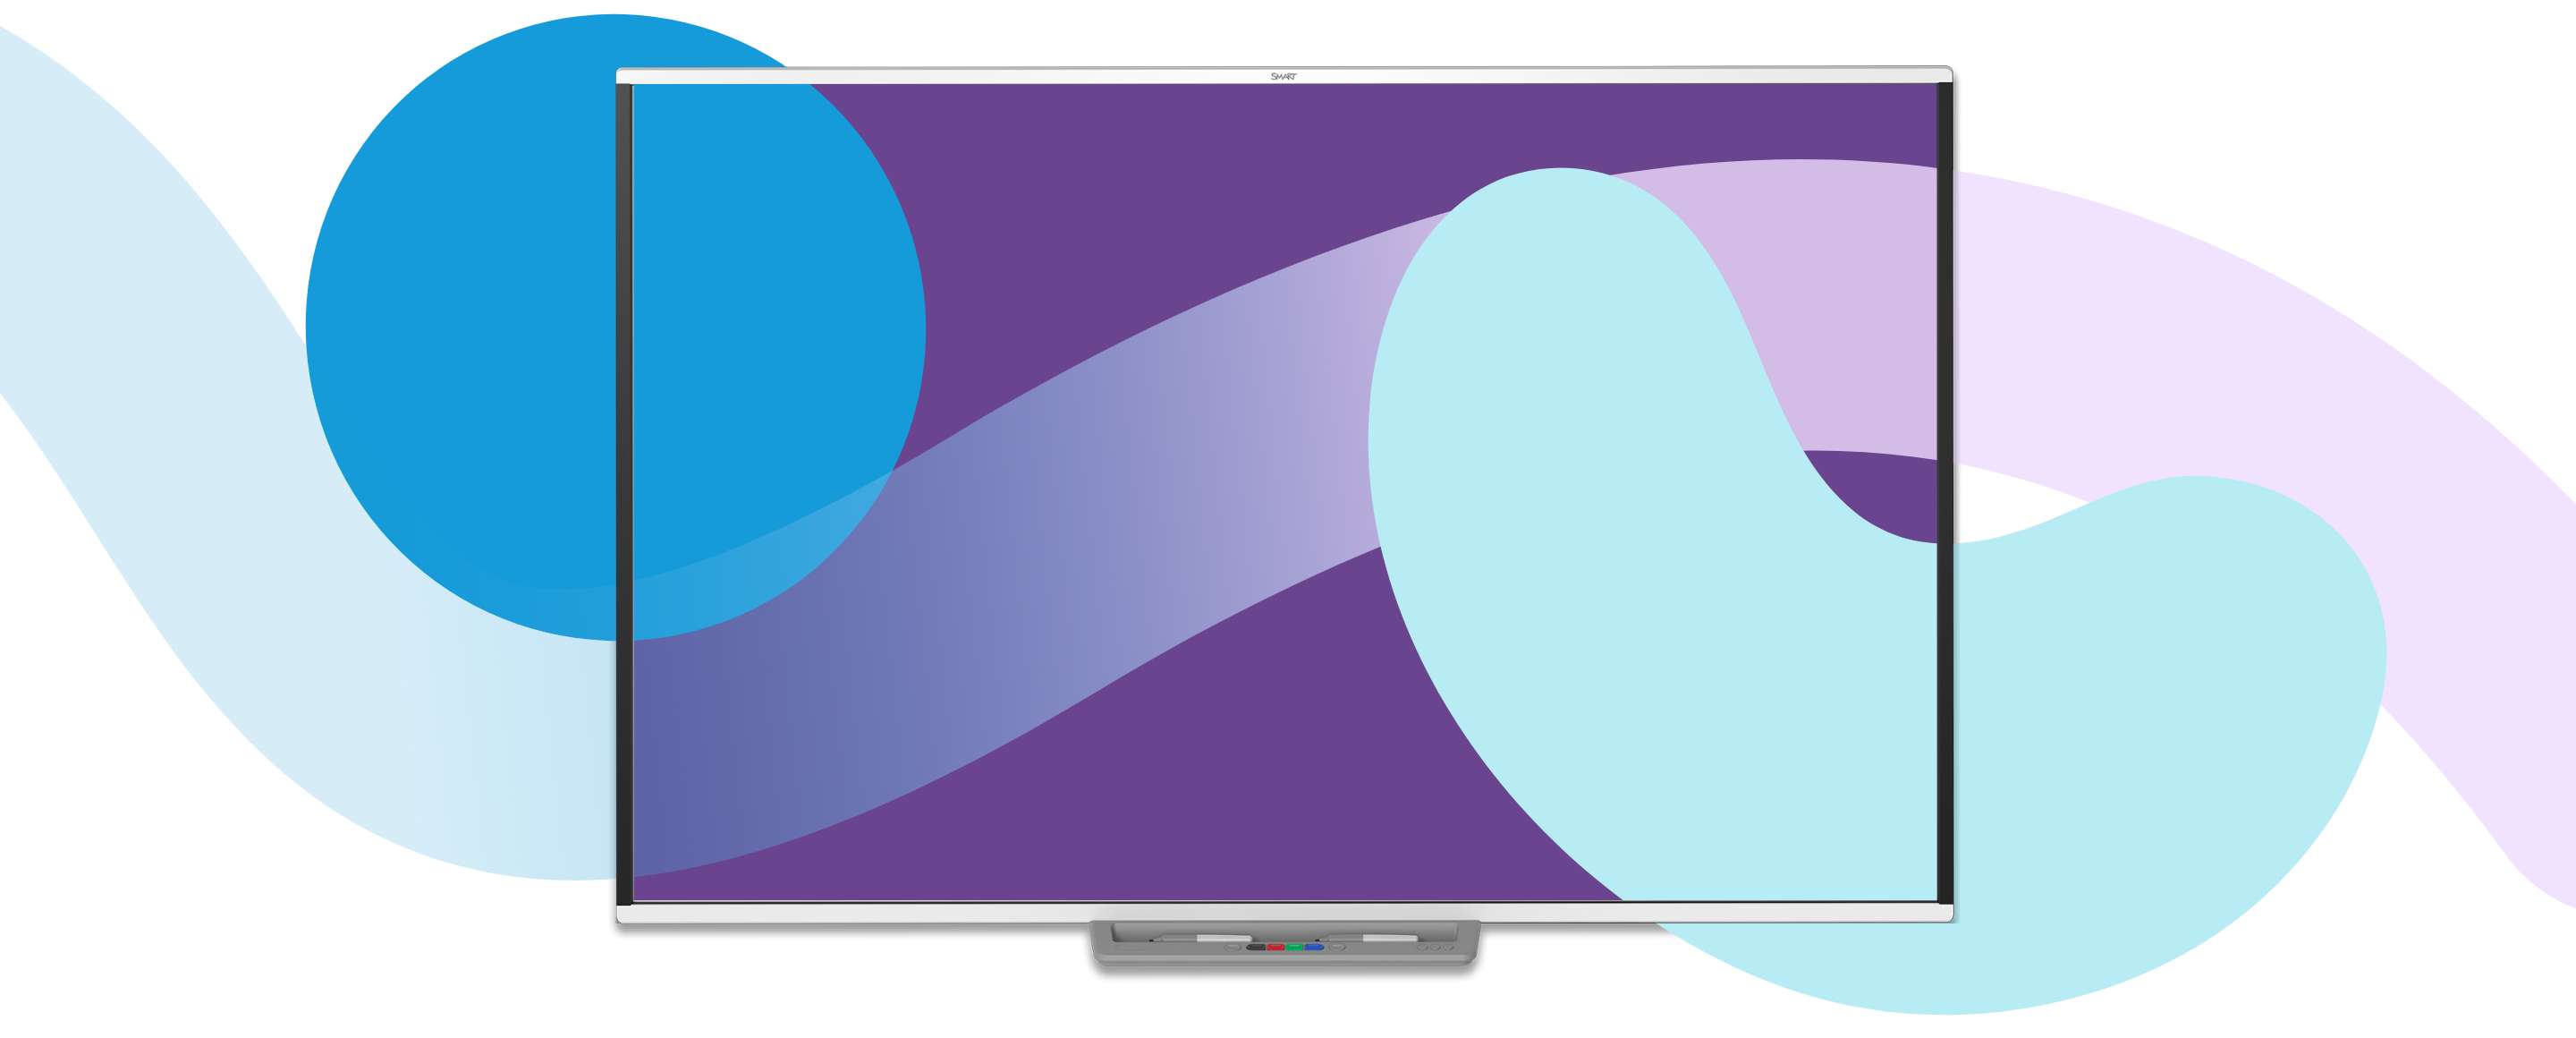 SMART Board interactive whiteboard displayed against a background of abstract, colorful shapes, illustrating the sleek design and vibrant display capabilities of the educational technology.